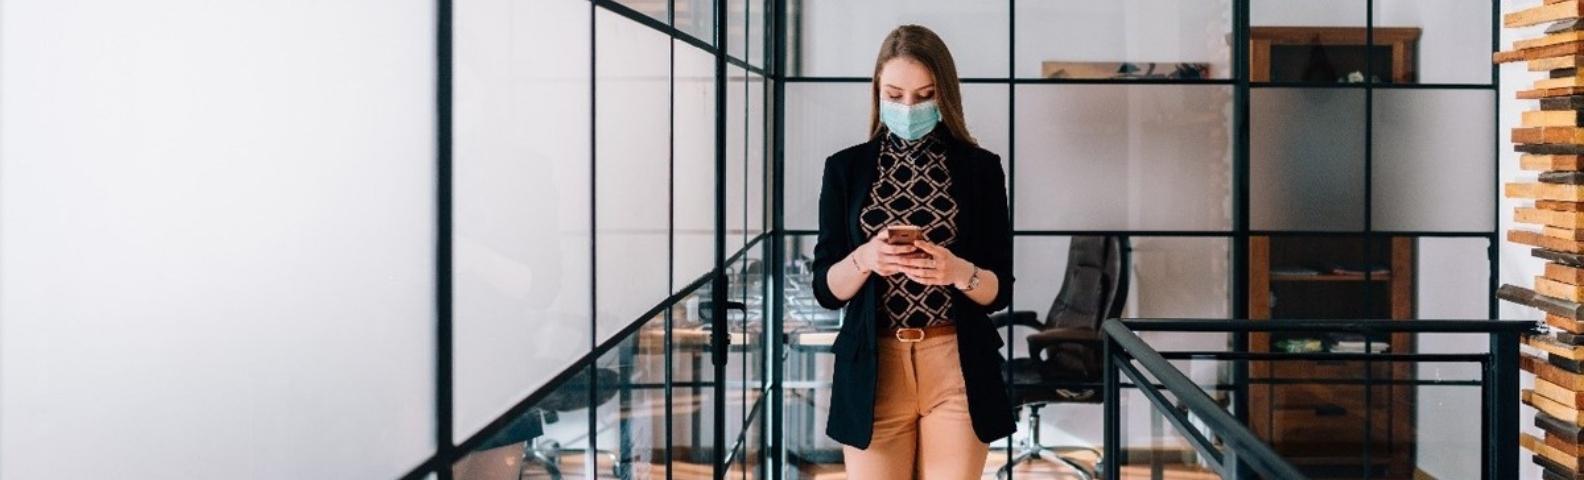 A woman texting in an office as she wears a mask